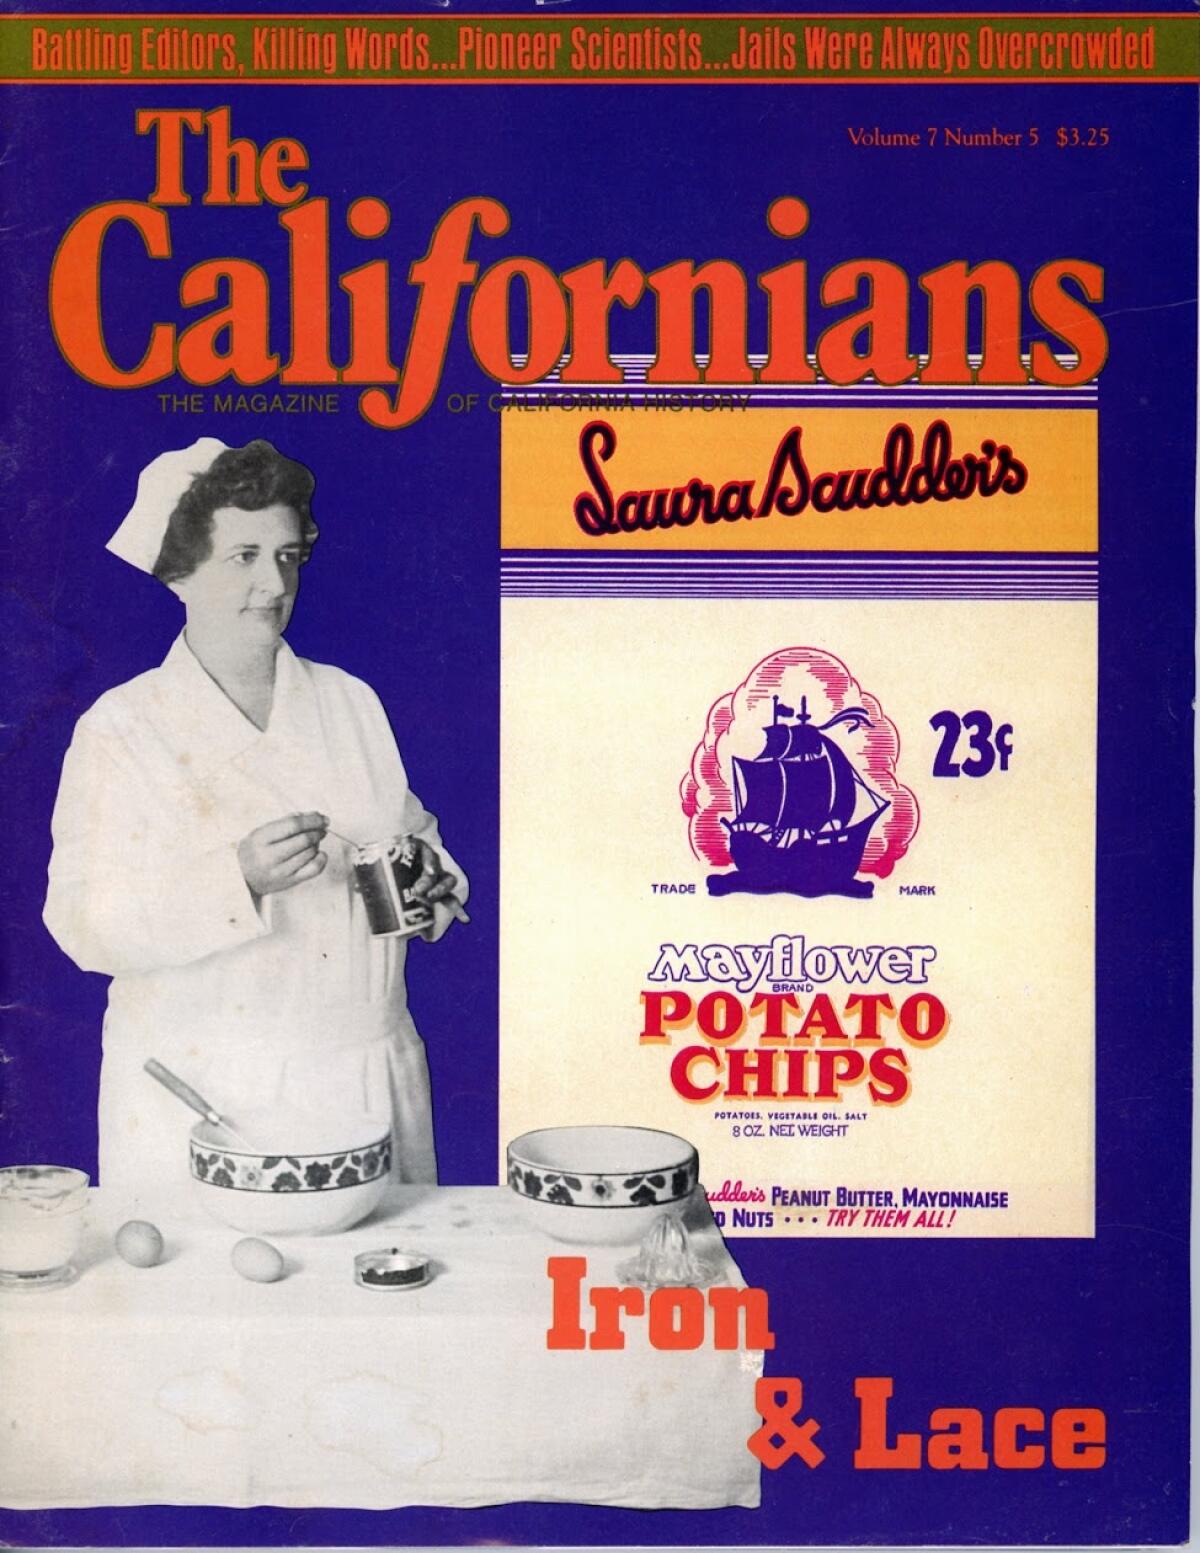 The January 1990 cover of The Californians: The Magazine of California History magazine.